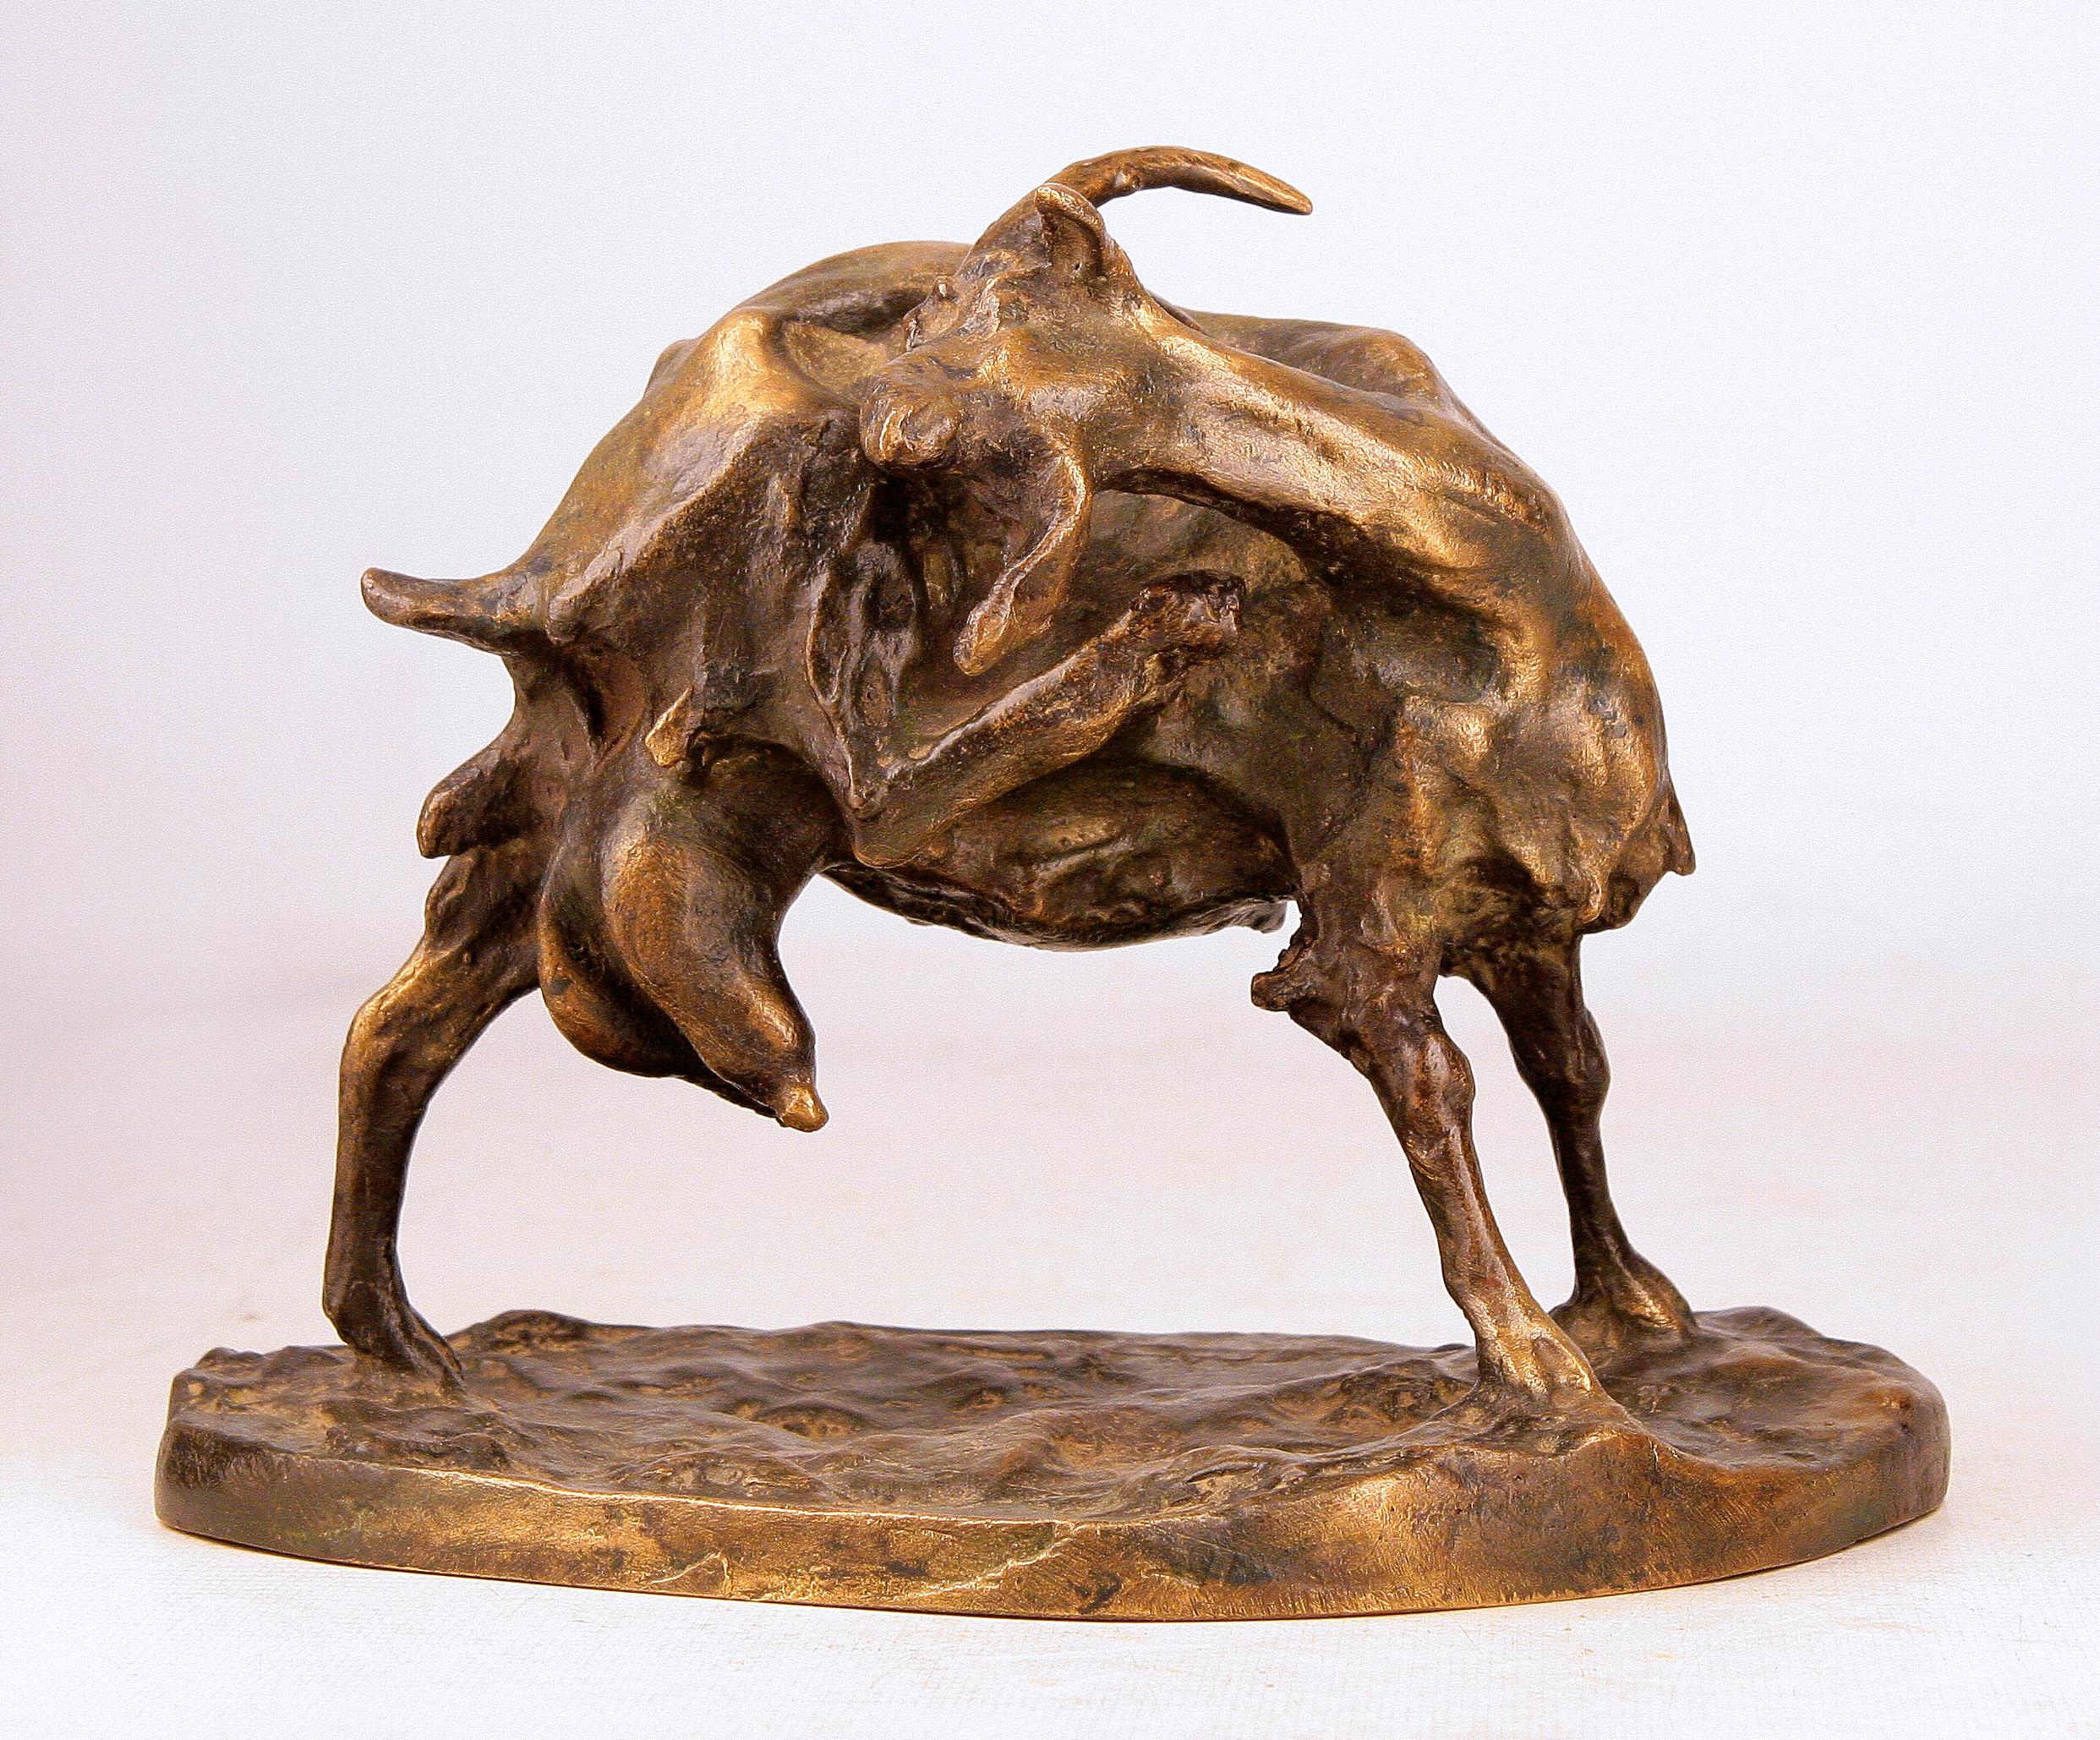 Patinated bronze early 20th century sculpture of goat by italian sculptor Ernesto Bazzaro

By: Ernesto Bazzaro
Material: bronze, copper, metal
Technique: cast, molded, polished, patinated, metalwork
Dimensions: 6 in x 8.5 in x 7 in
Date: early 20th